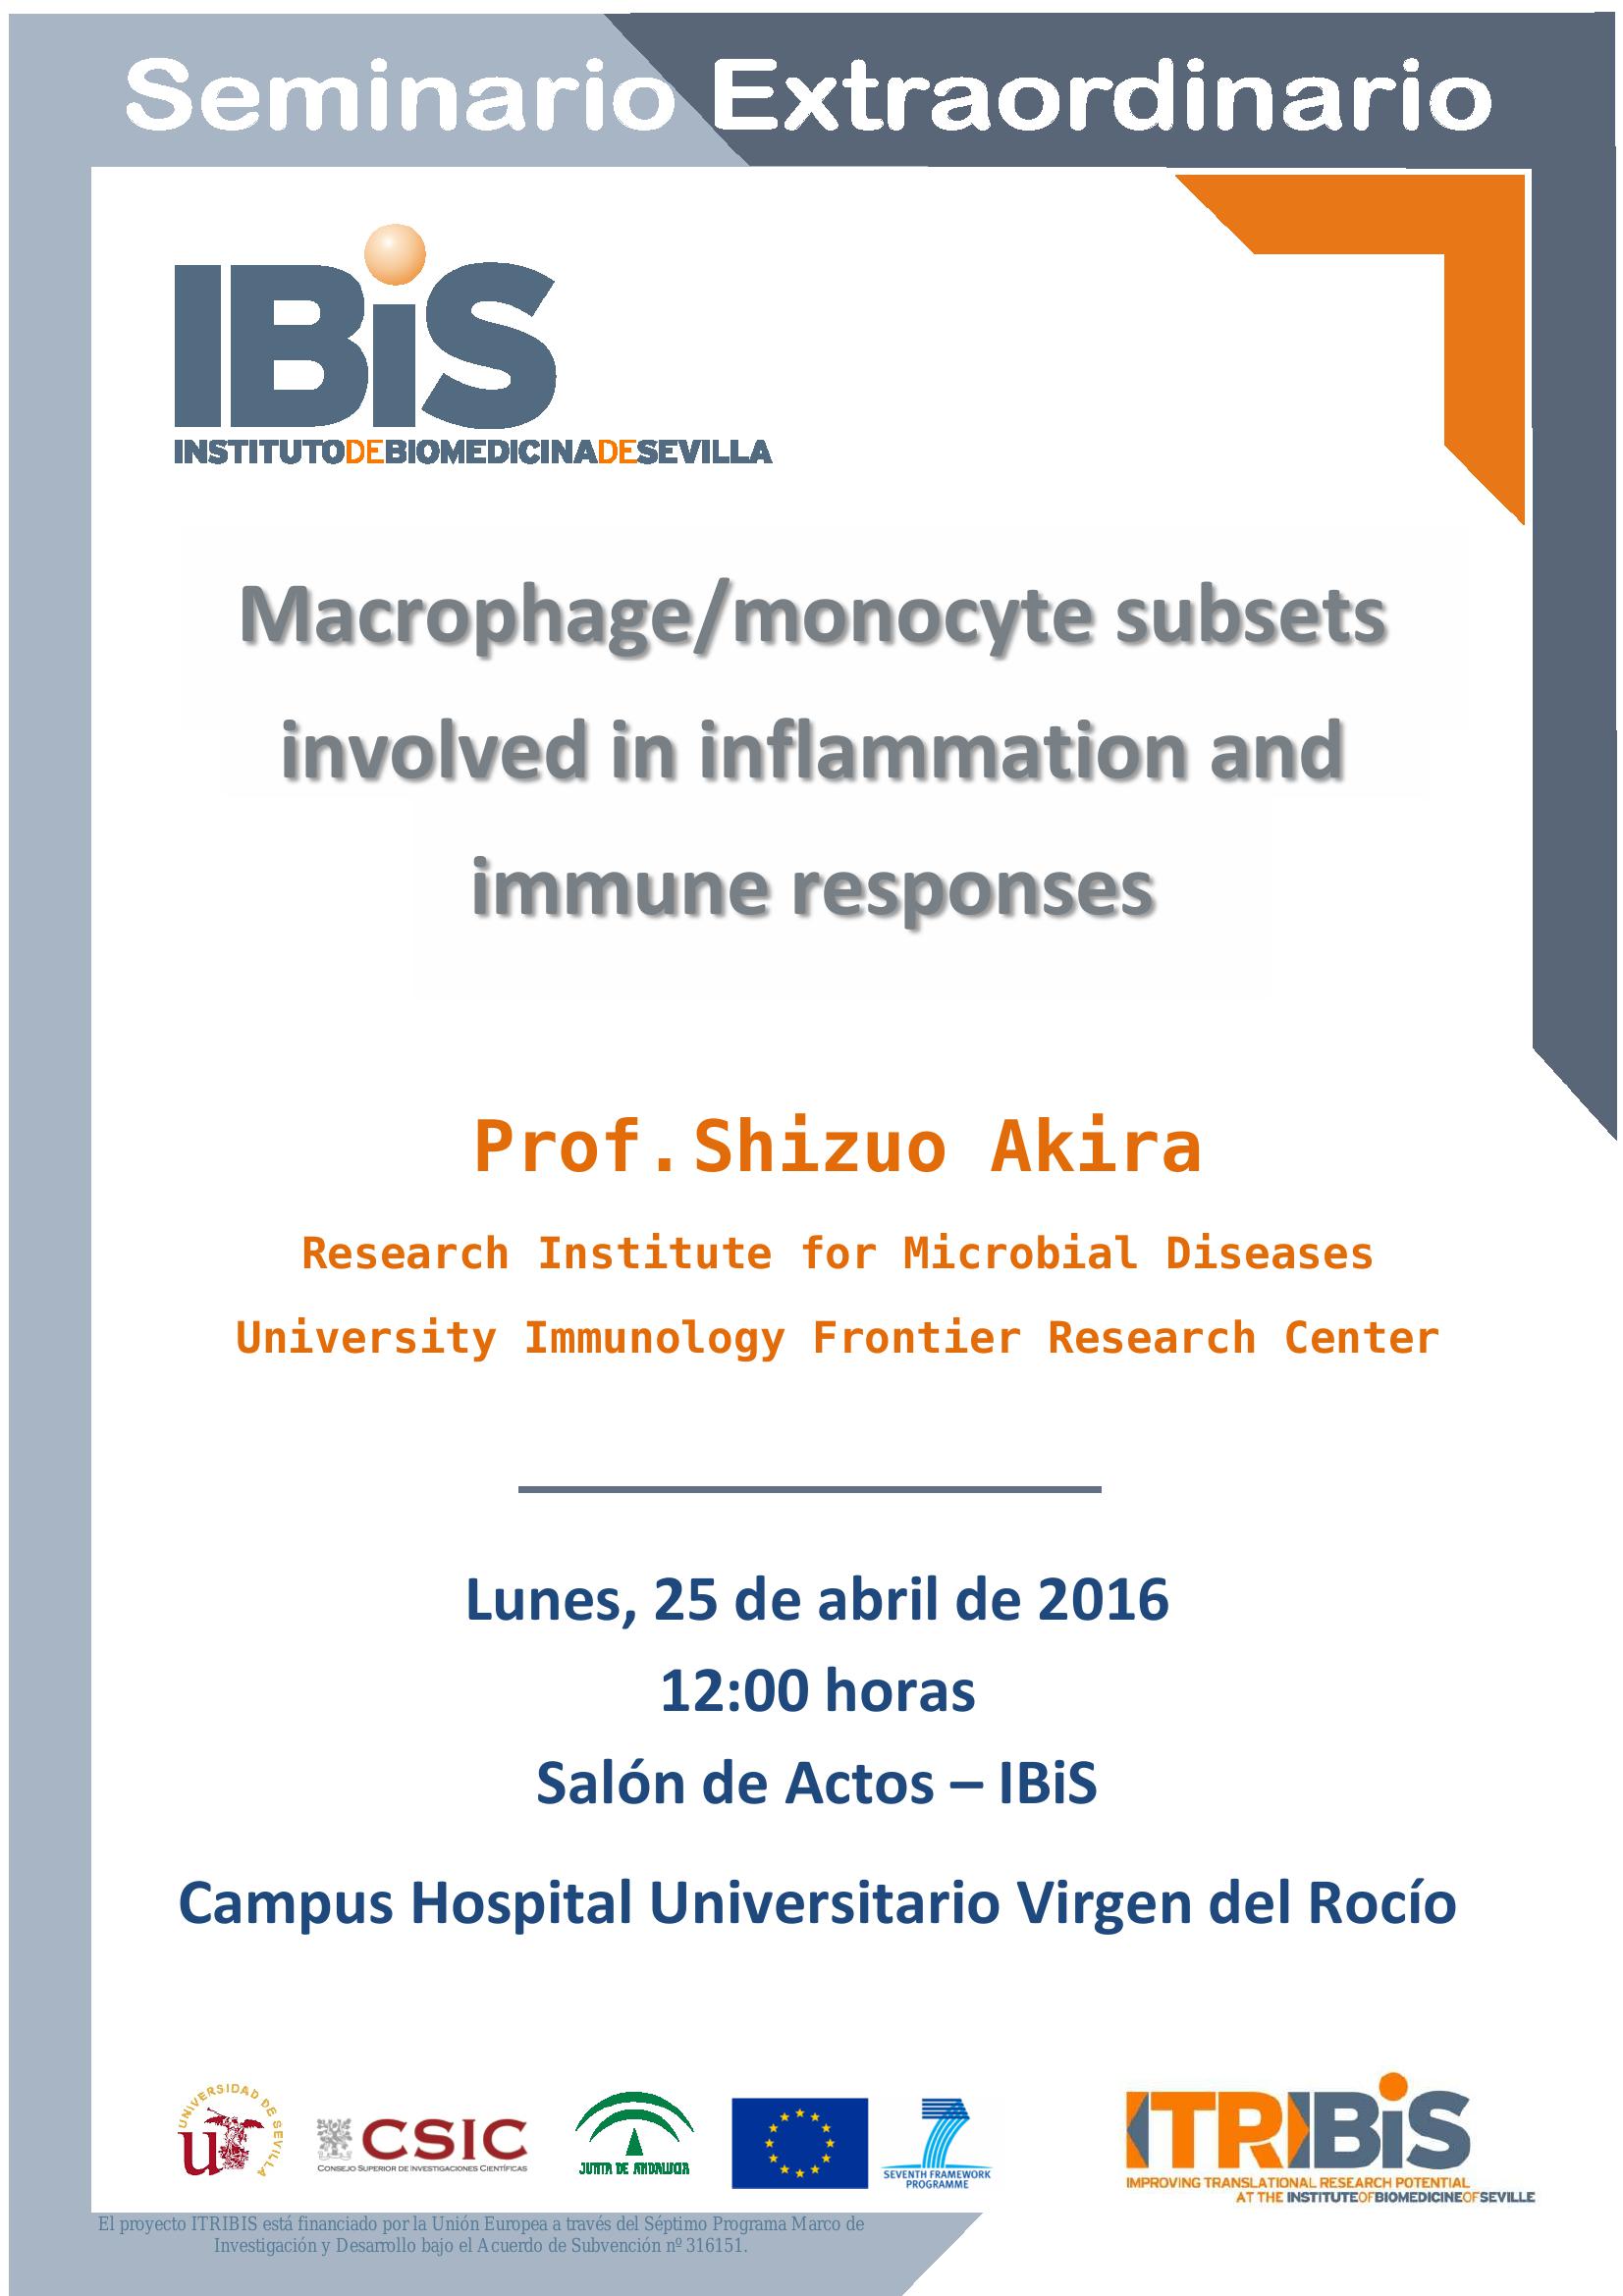 Poster: Macrophage/monocyte subsets involved in inflammation and immune responses